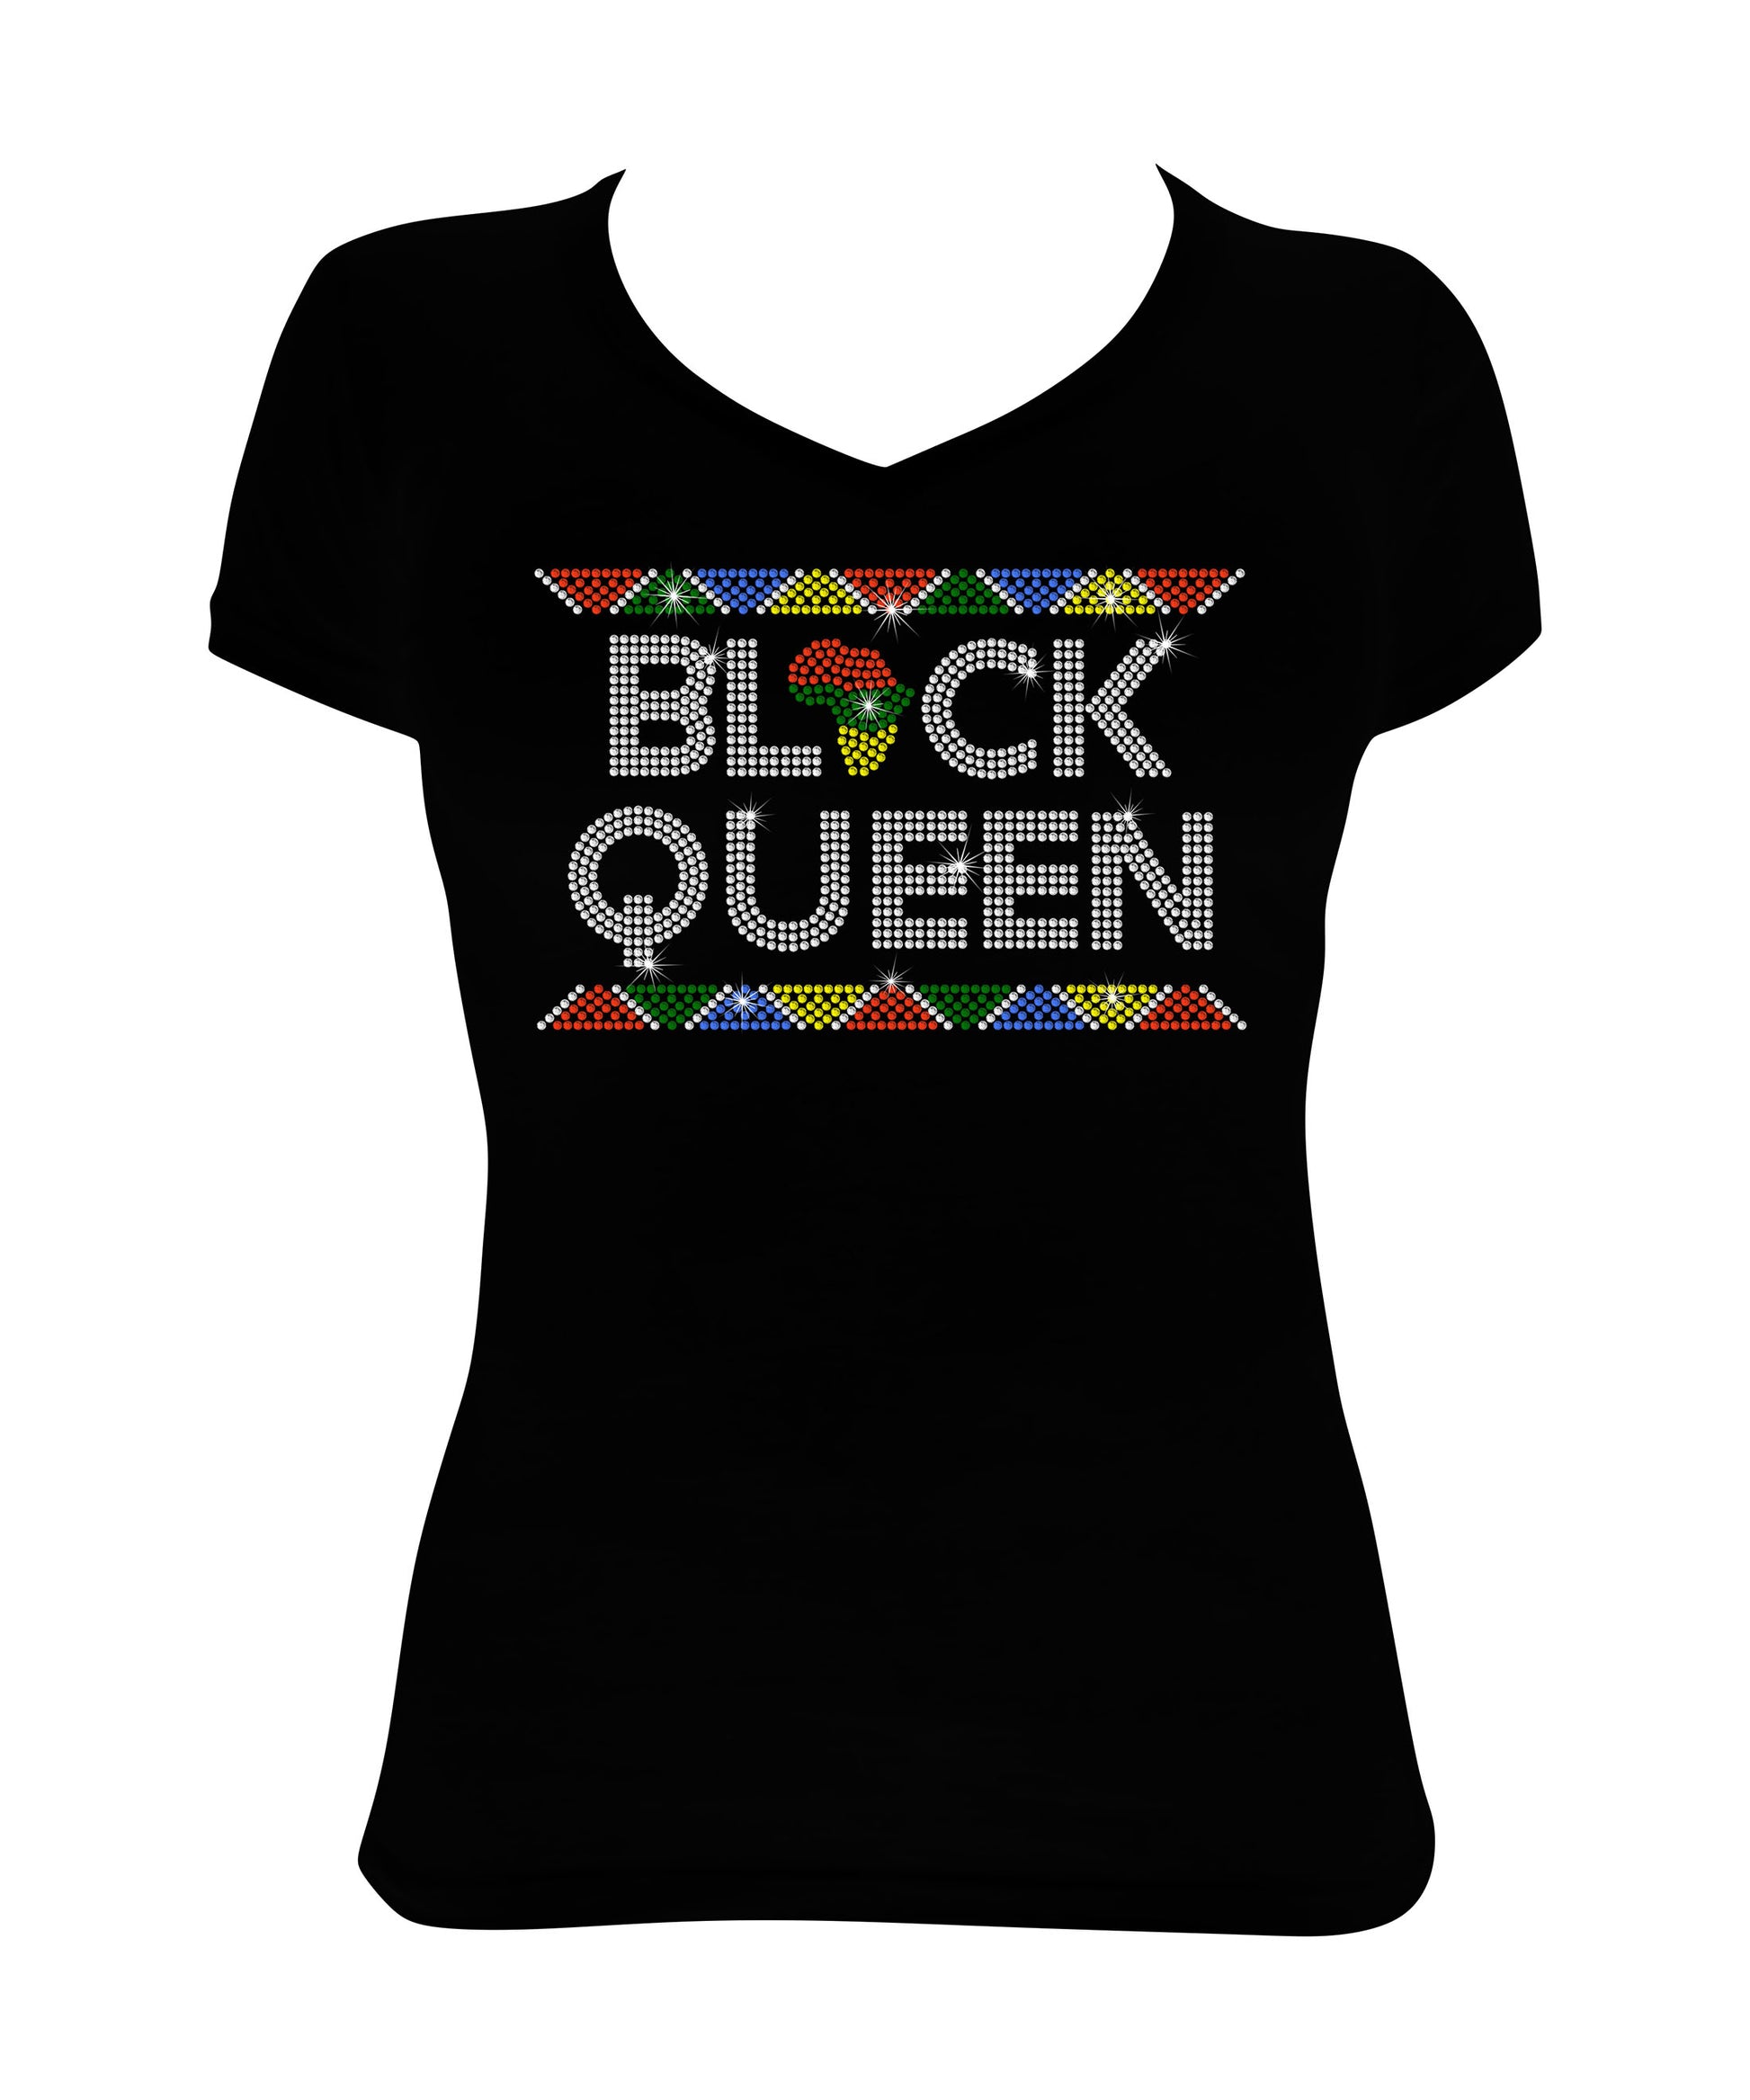 Black Queen - in African Colors Border Rhinestone Shirt